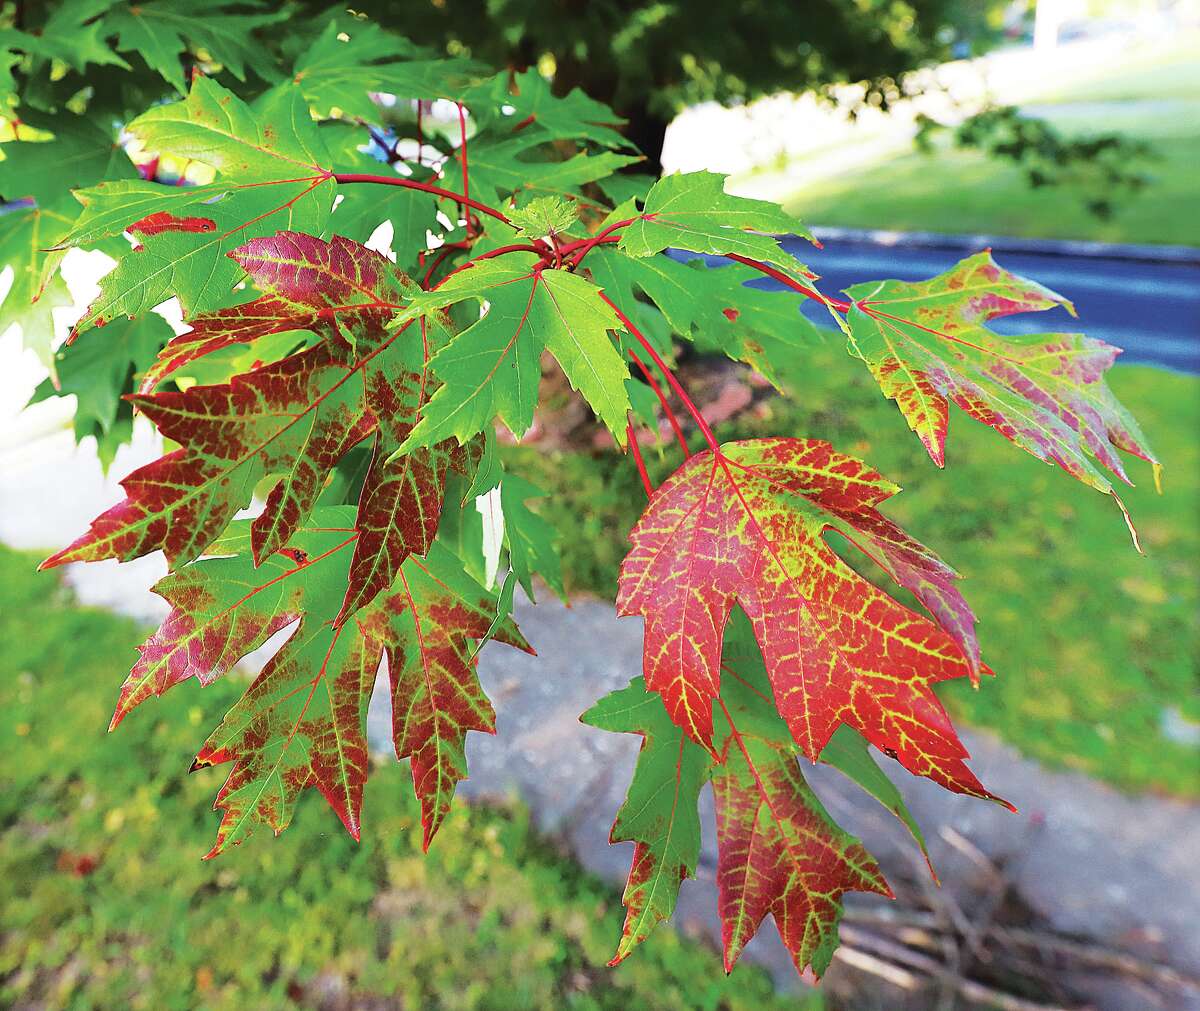 John Badman|The Telegraph It may have felt more like summer Tuesday with record-breaking temperatures near 100 degrees, but that didn't fool area trees which have begun their fall change. Chlorophyll, which gives tree leaves their green color most of the year, stops flowing in the fall and the leaves begin to show their true colors. This maple tree on Aberdeen Avenue in Alton has started the change, especially where leaves are in direct sunlight. The outside will feel far more like autumn on Thursday, which happens to be the Autumn Equiniox, when the high temperature will only reach 70 degrees.